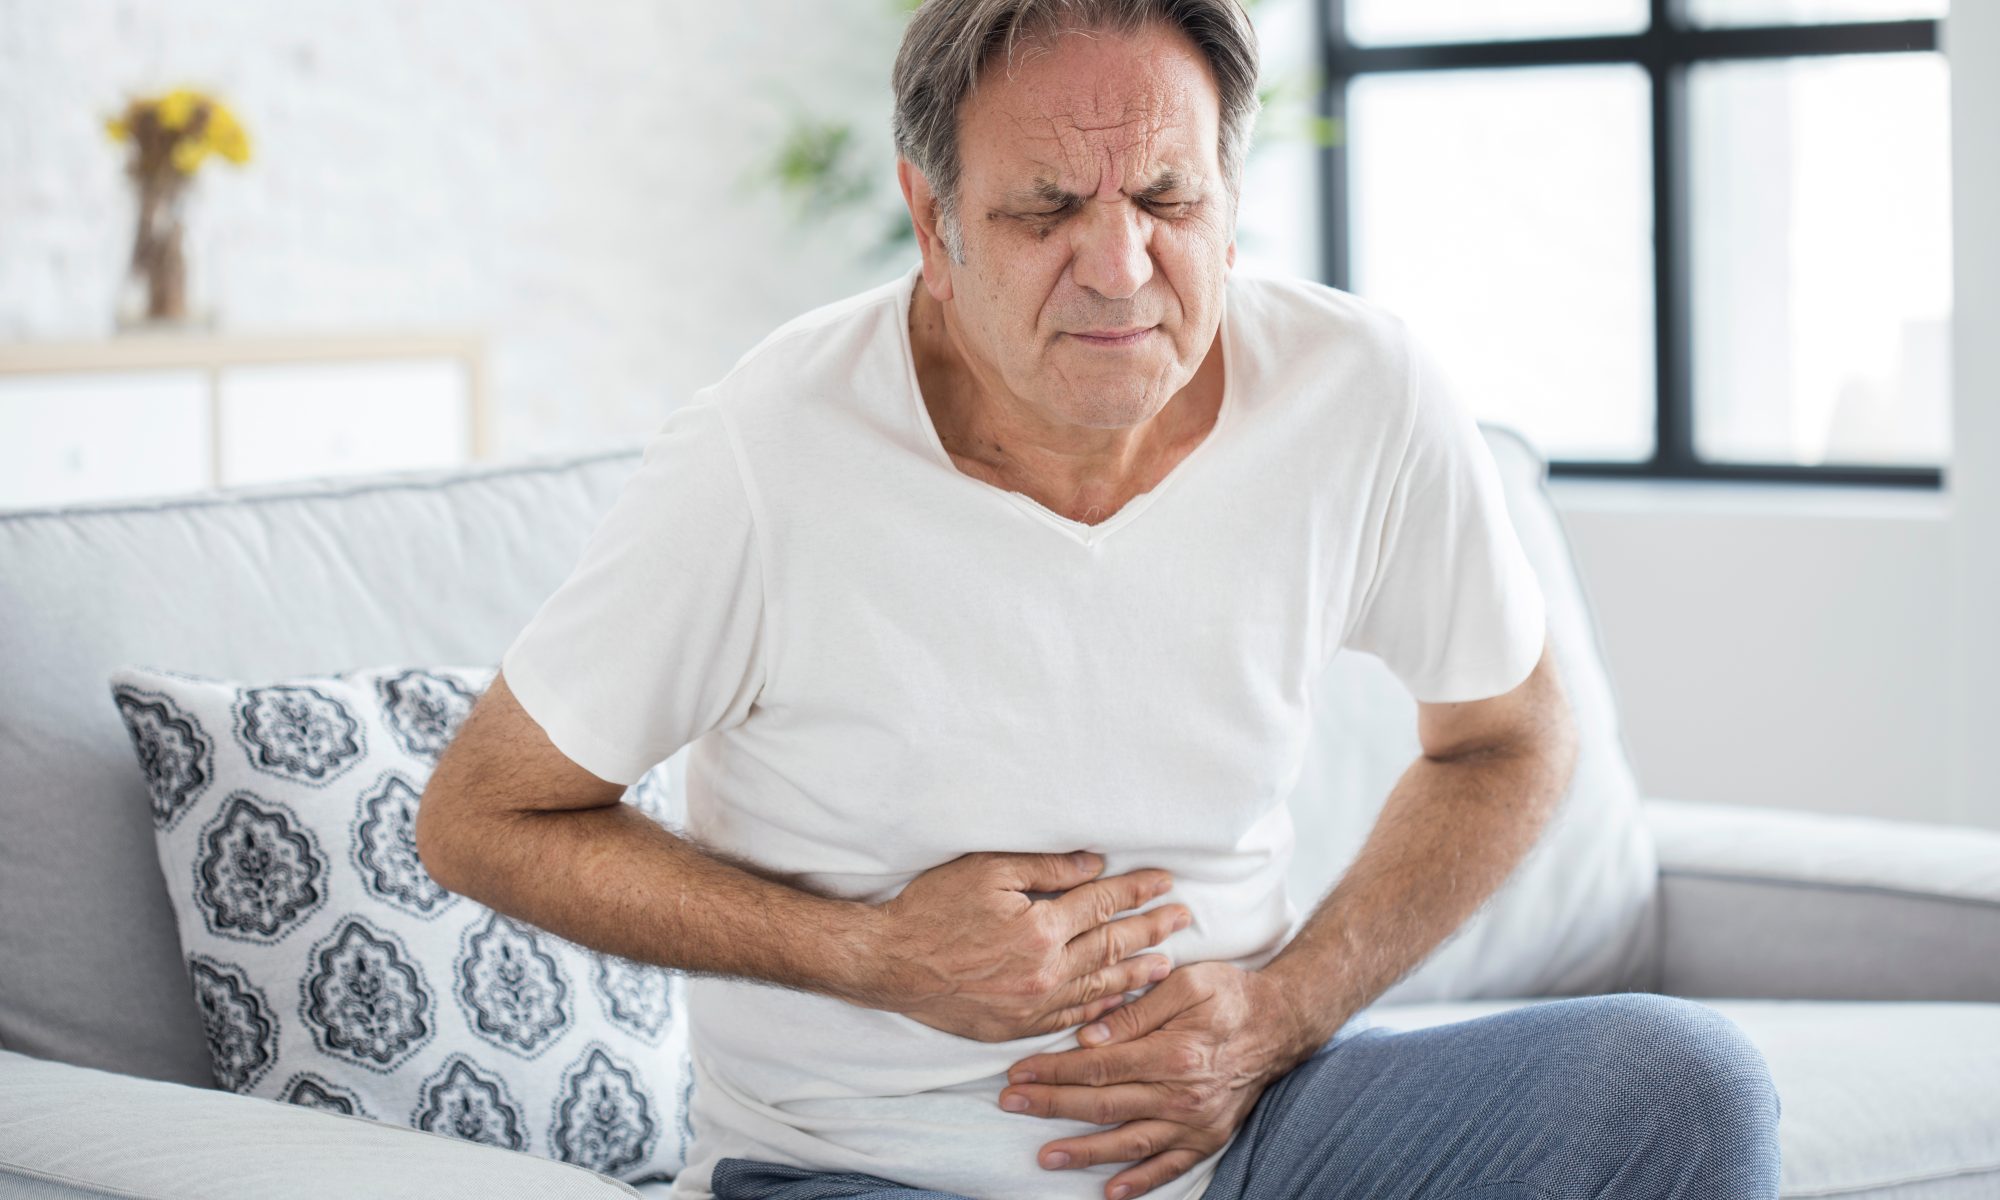 Constipation Help and Advice: Symptoms, Causes, and Home Remedies